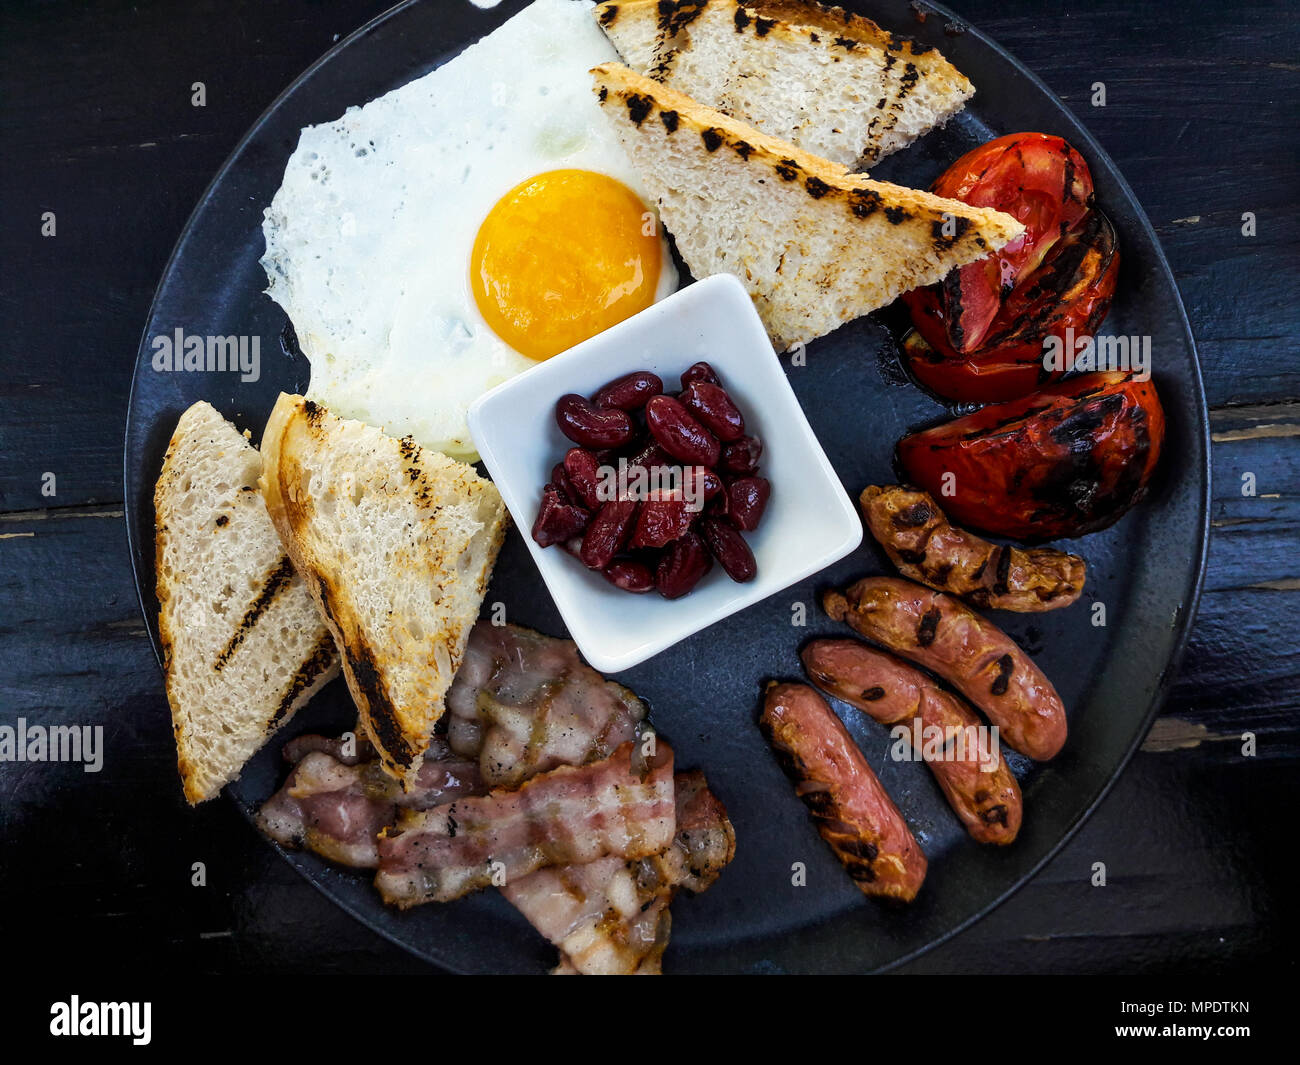 English Breakfast with Bacon, Red Beans, Sausage, Egg and Fried Bread on black surface. Stock Photo